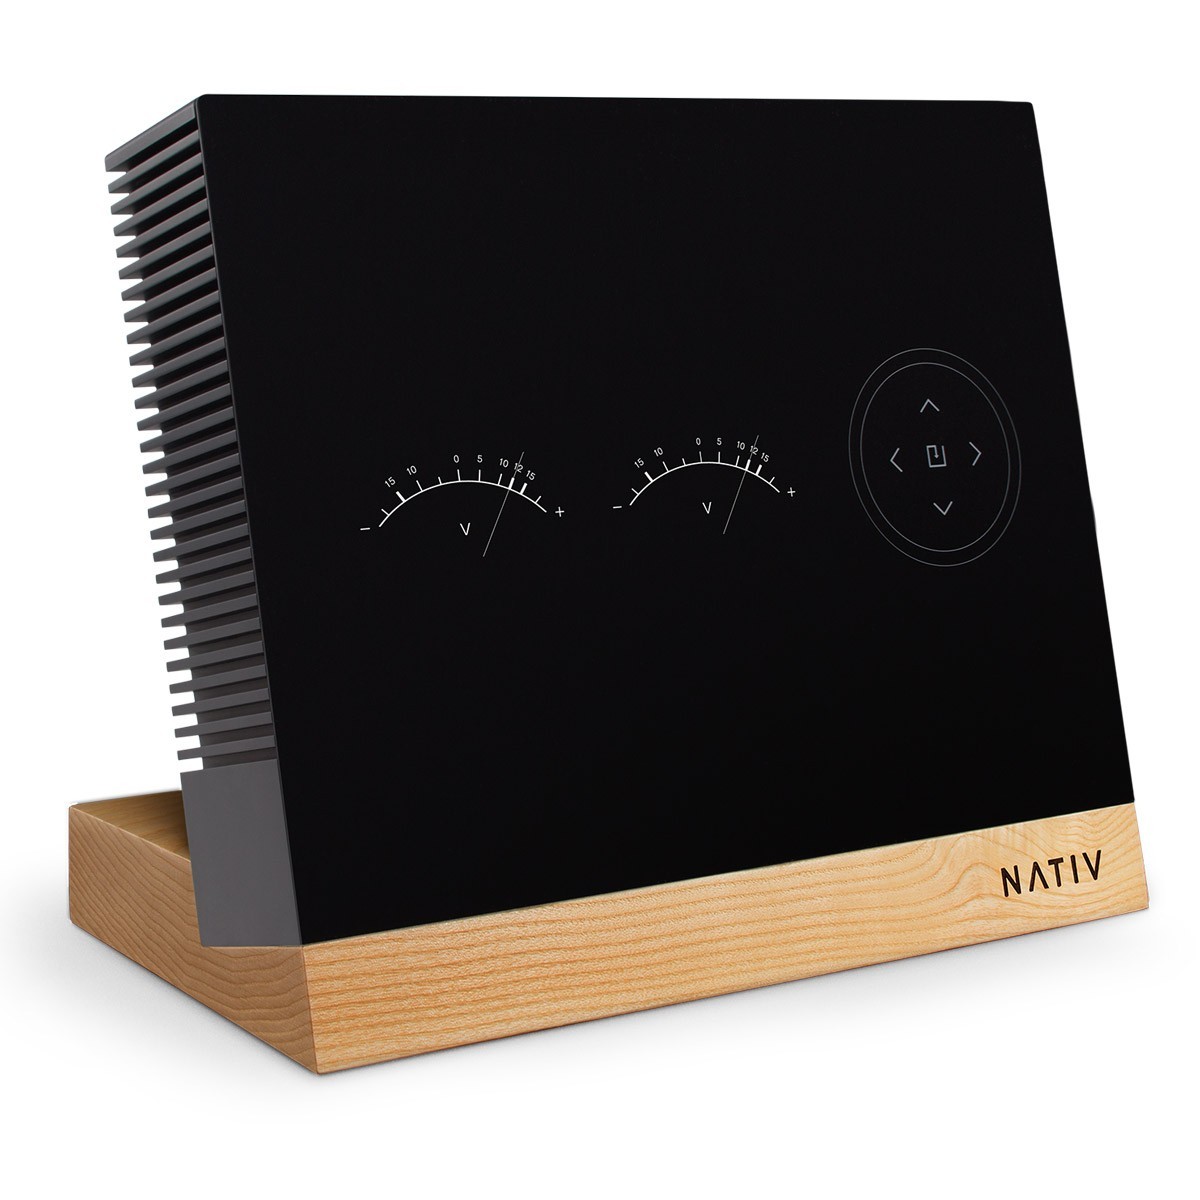 NATIV PULSE - Linear Regulated Power Supply for NATIV VITA and WAVE Walnut Stand